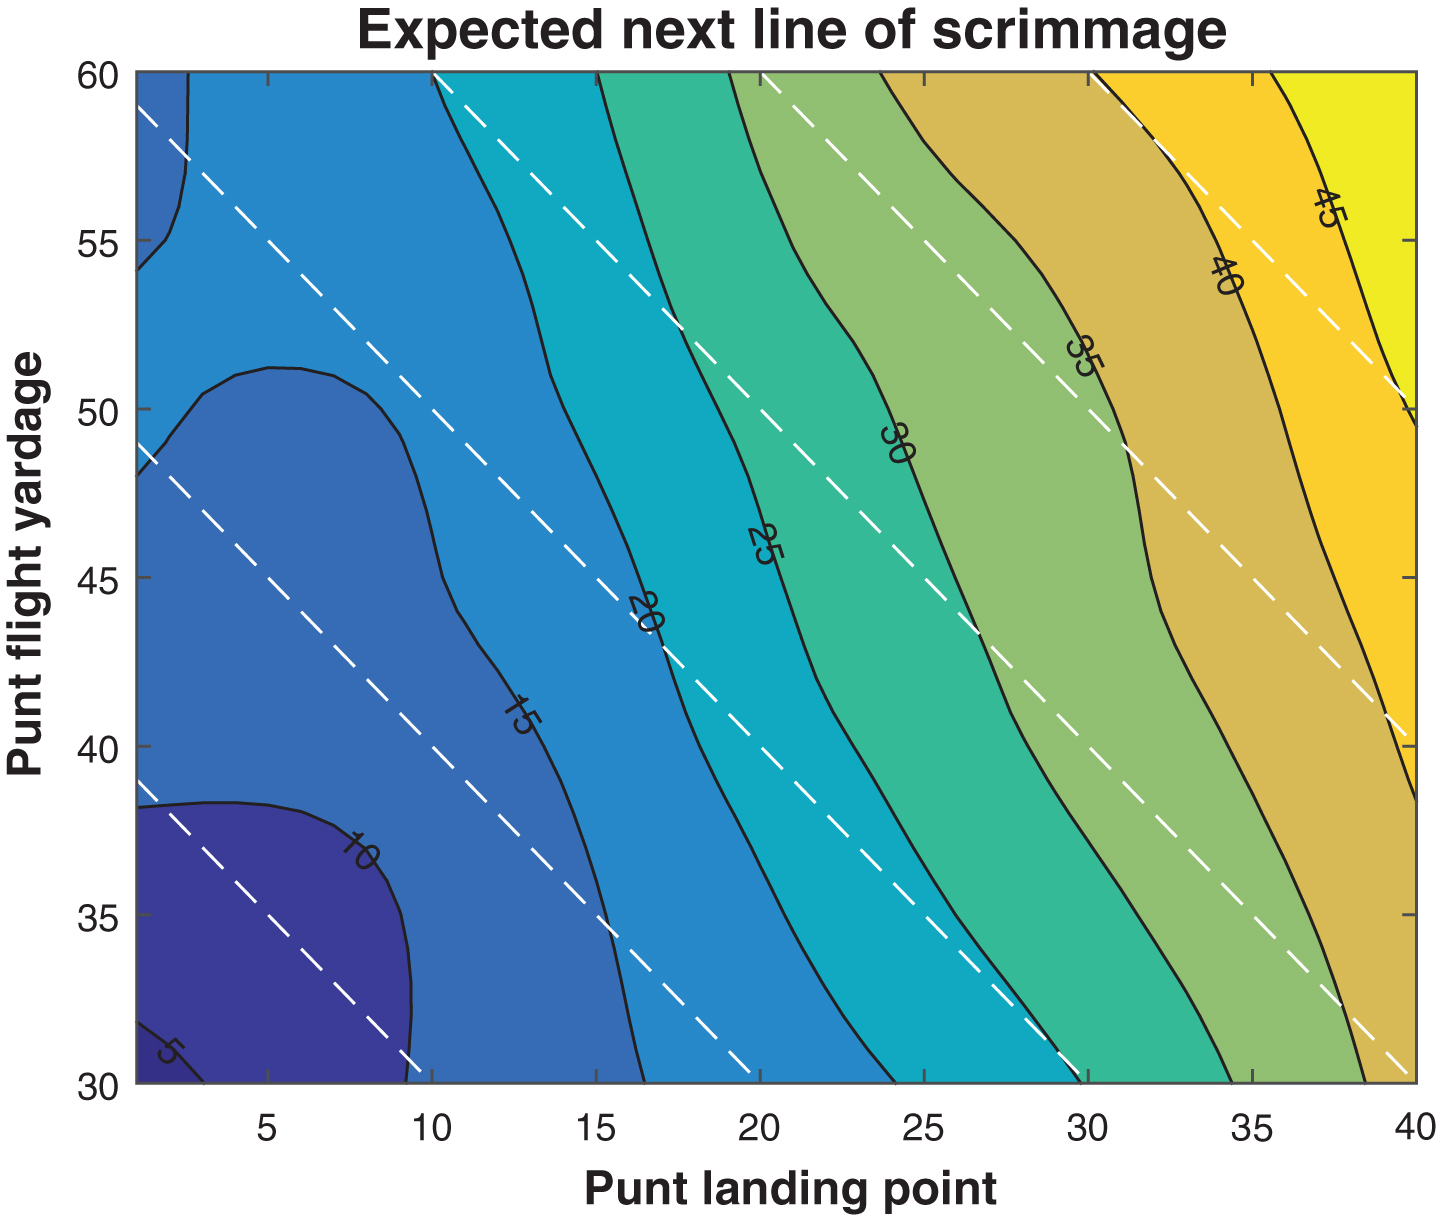 Expected next line of scrimmage, by landing point and fly distance, 2013.